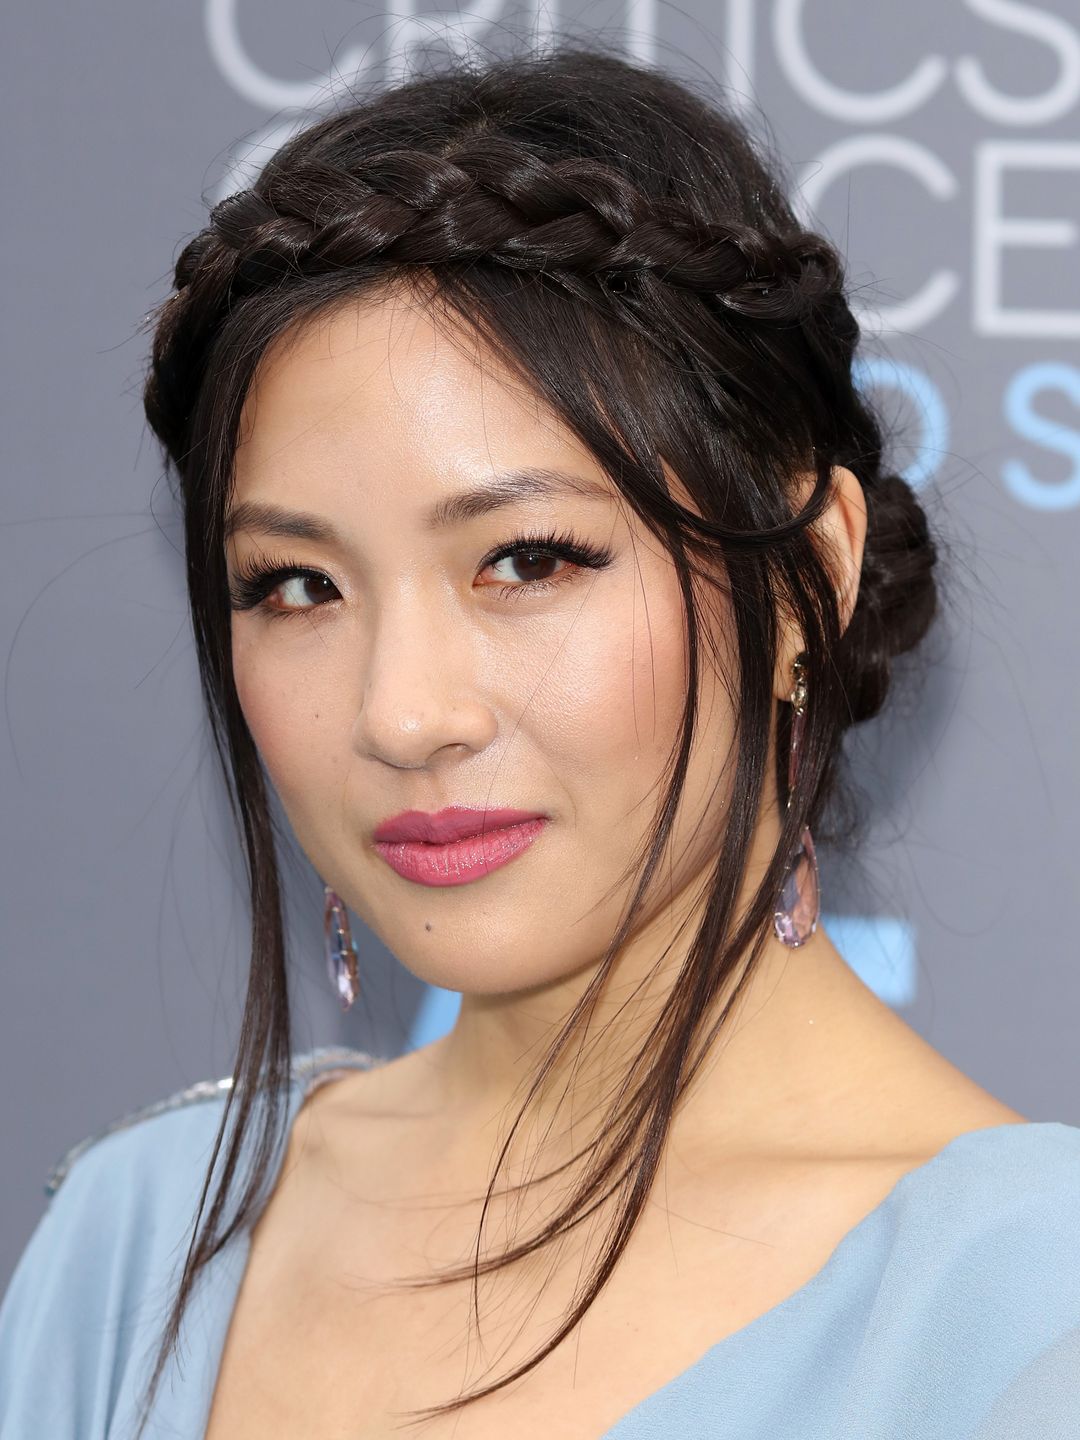 Constance Wu personal traits